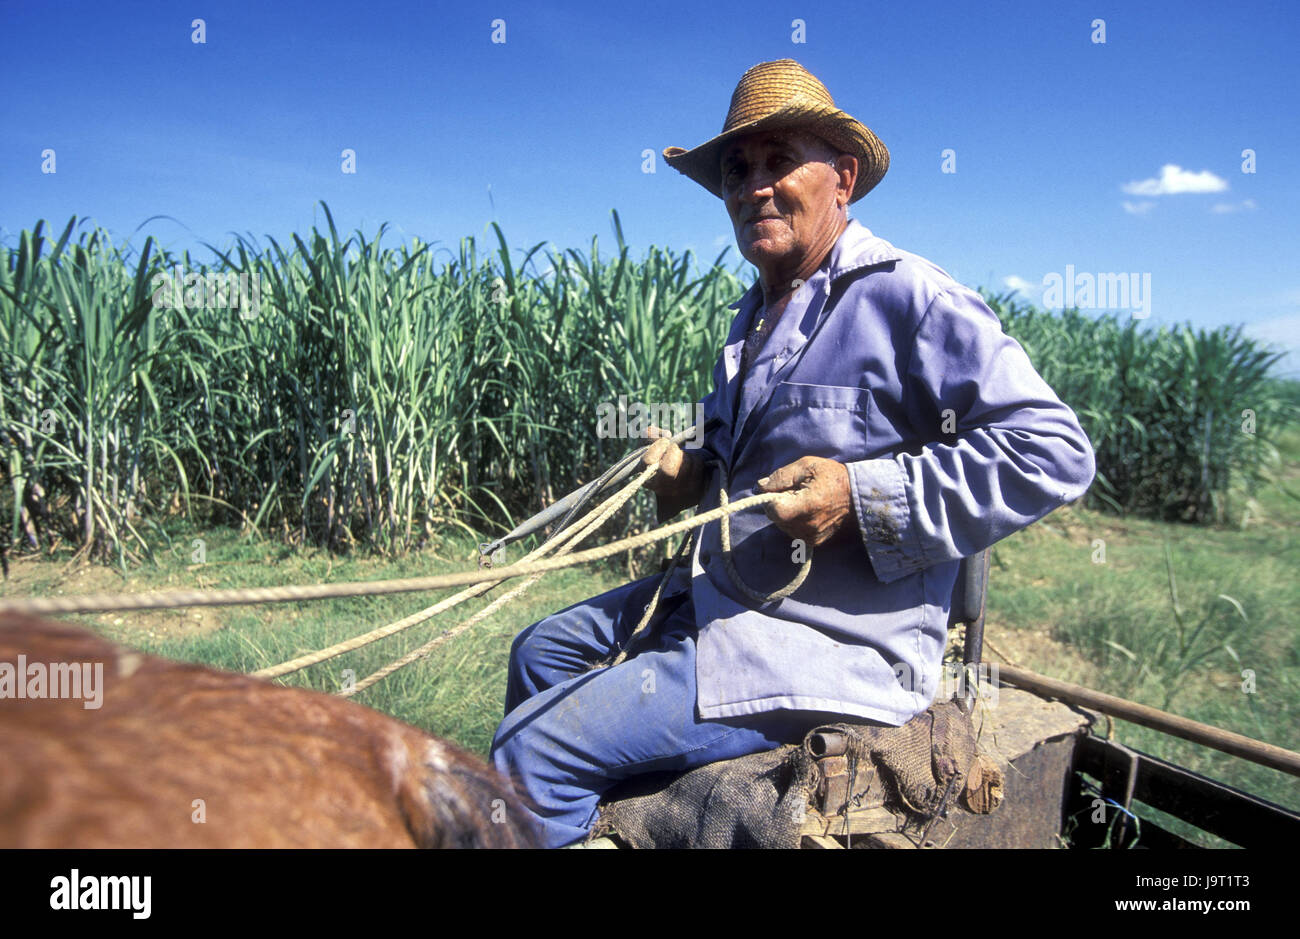 Cuba,Cueto,sugarcane plantation,farmer,cart,detail,no model release,Central America,plantation,annex,sugarcane,Cuban,local,boss,straw hat,horse and cart,horse's motorcycle combination,work,agriculture,outside, Stock Photo